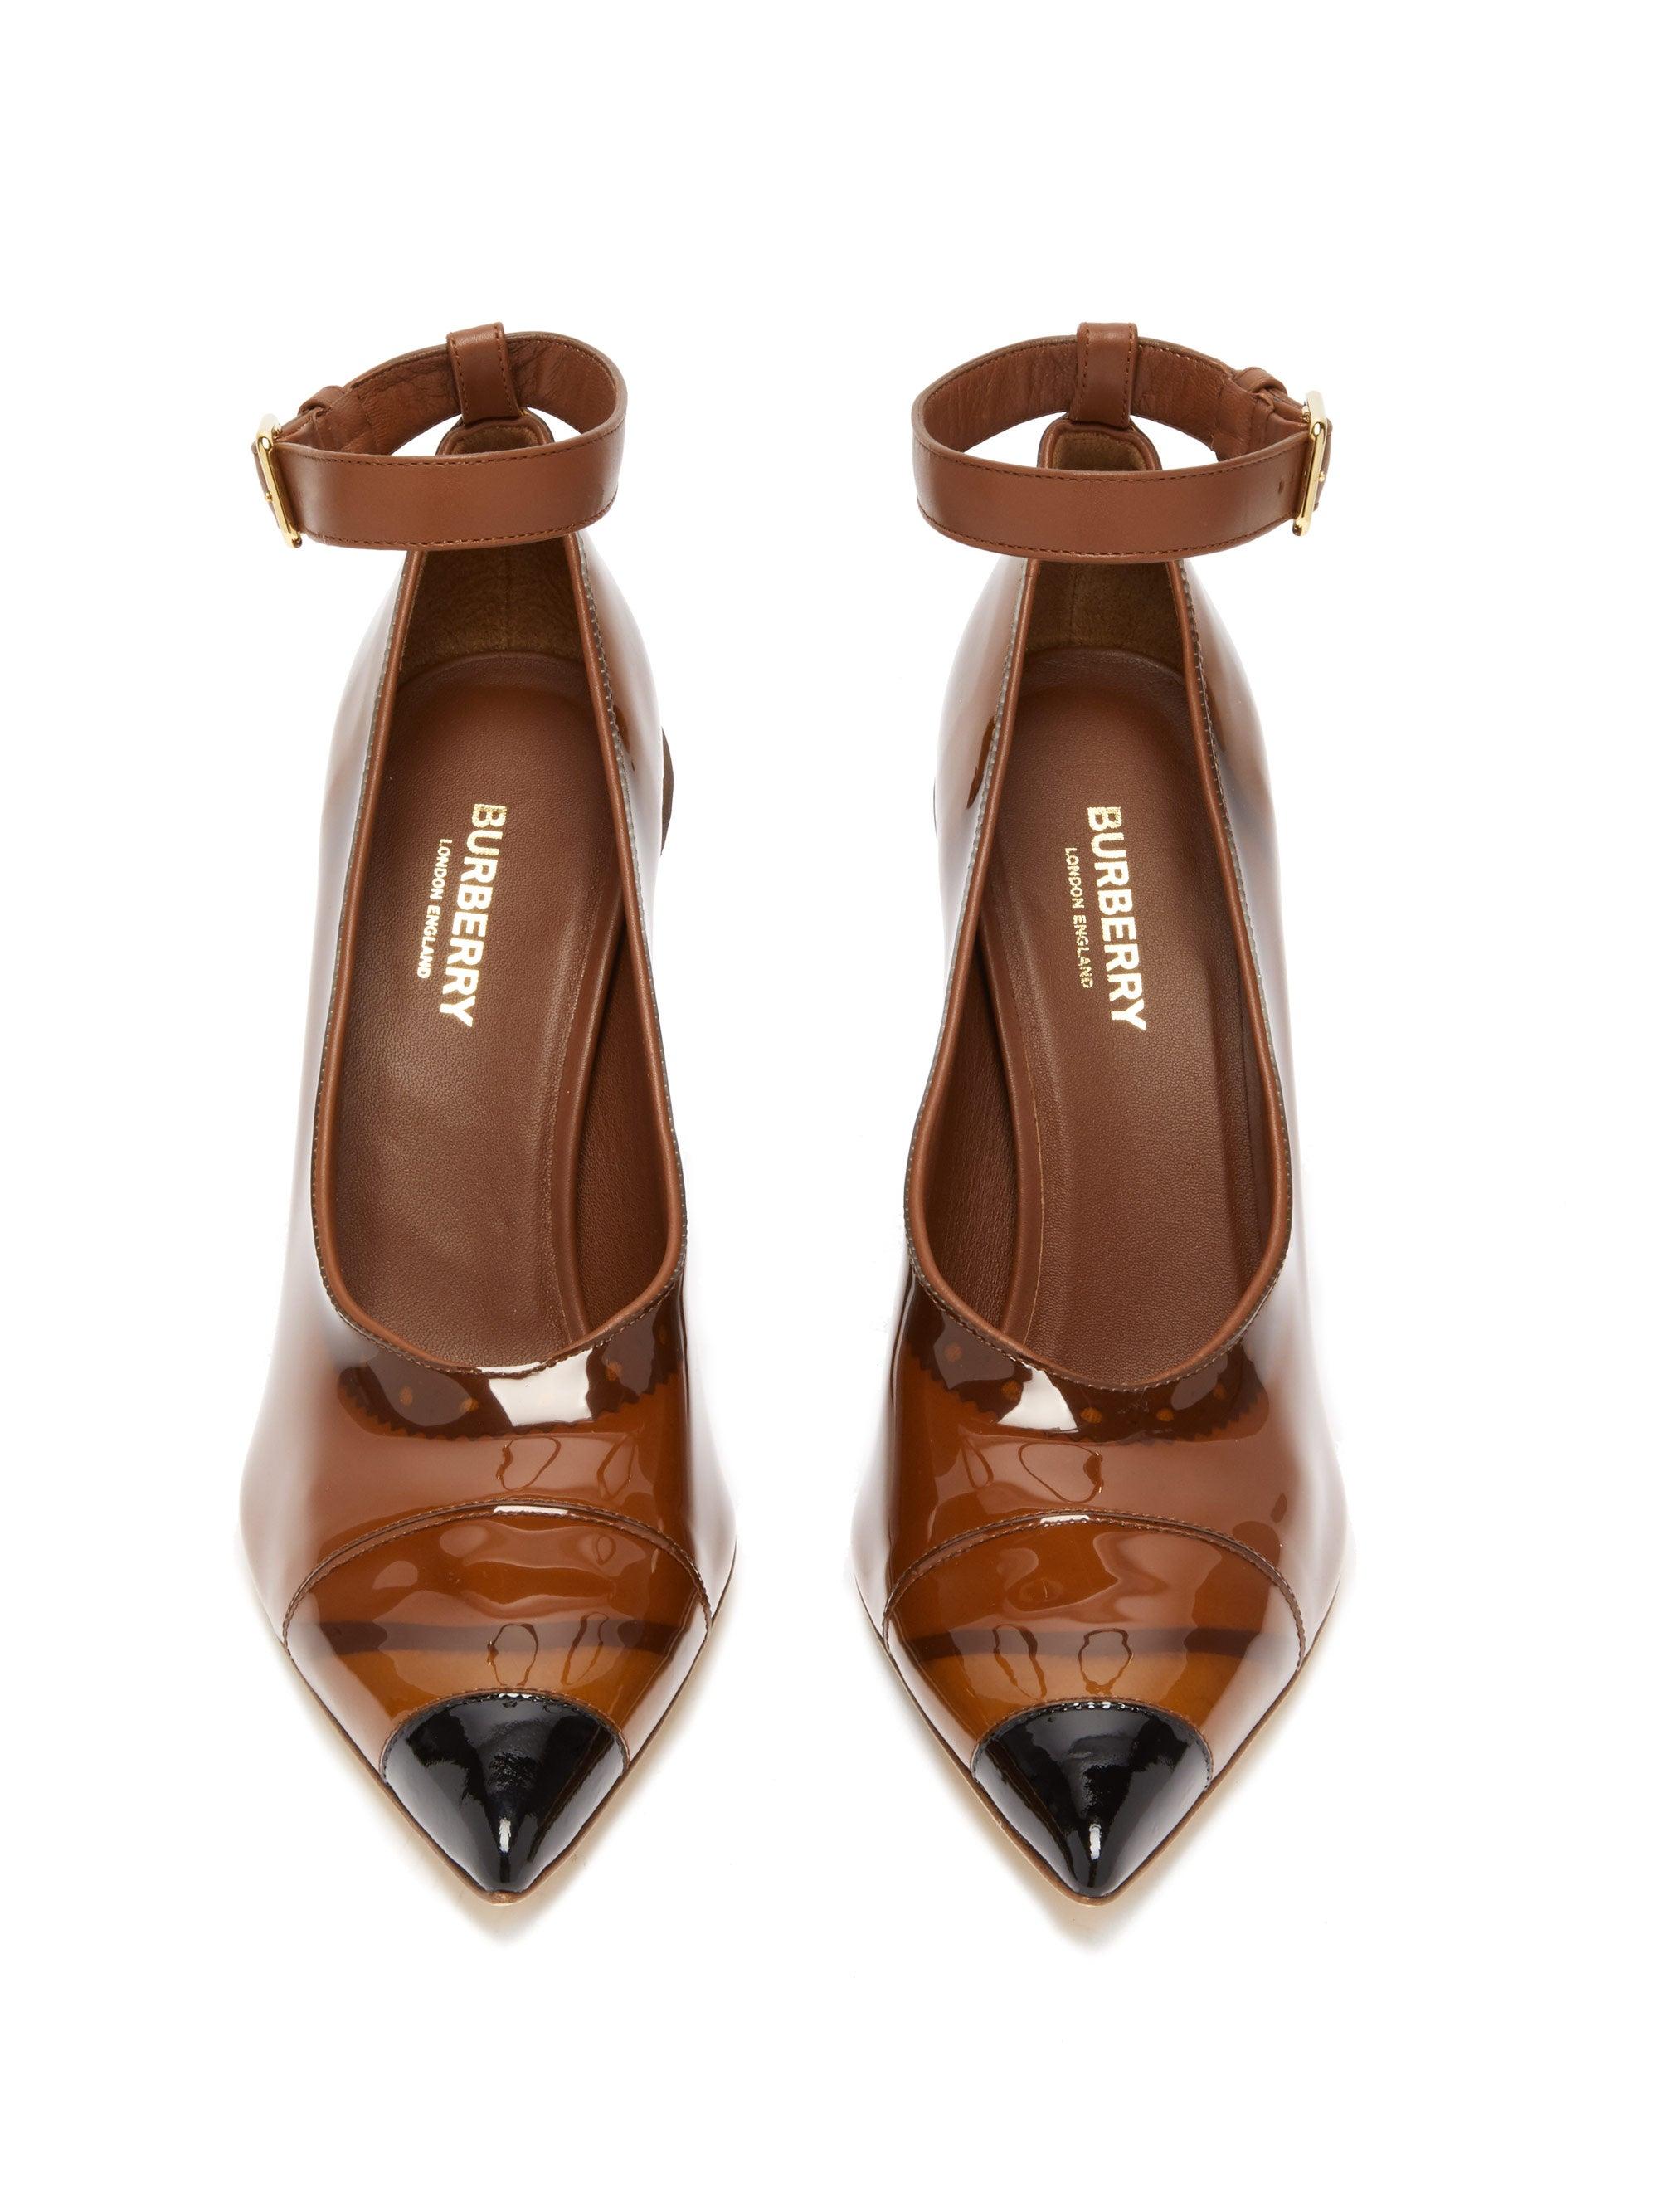 Burberry Evan Pvc-coated Leather Pumps in Brown | Lyst